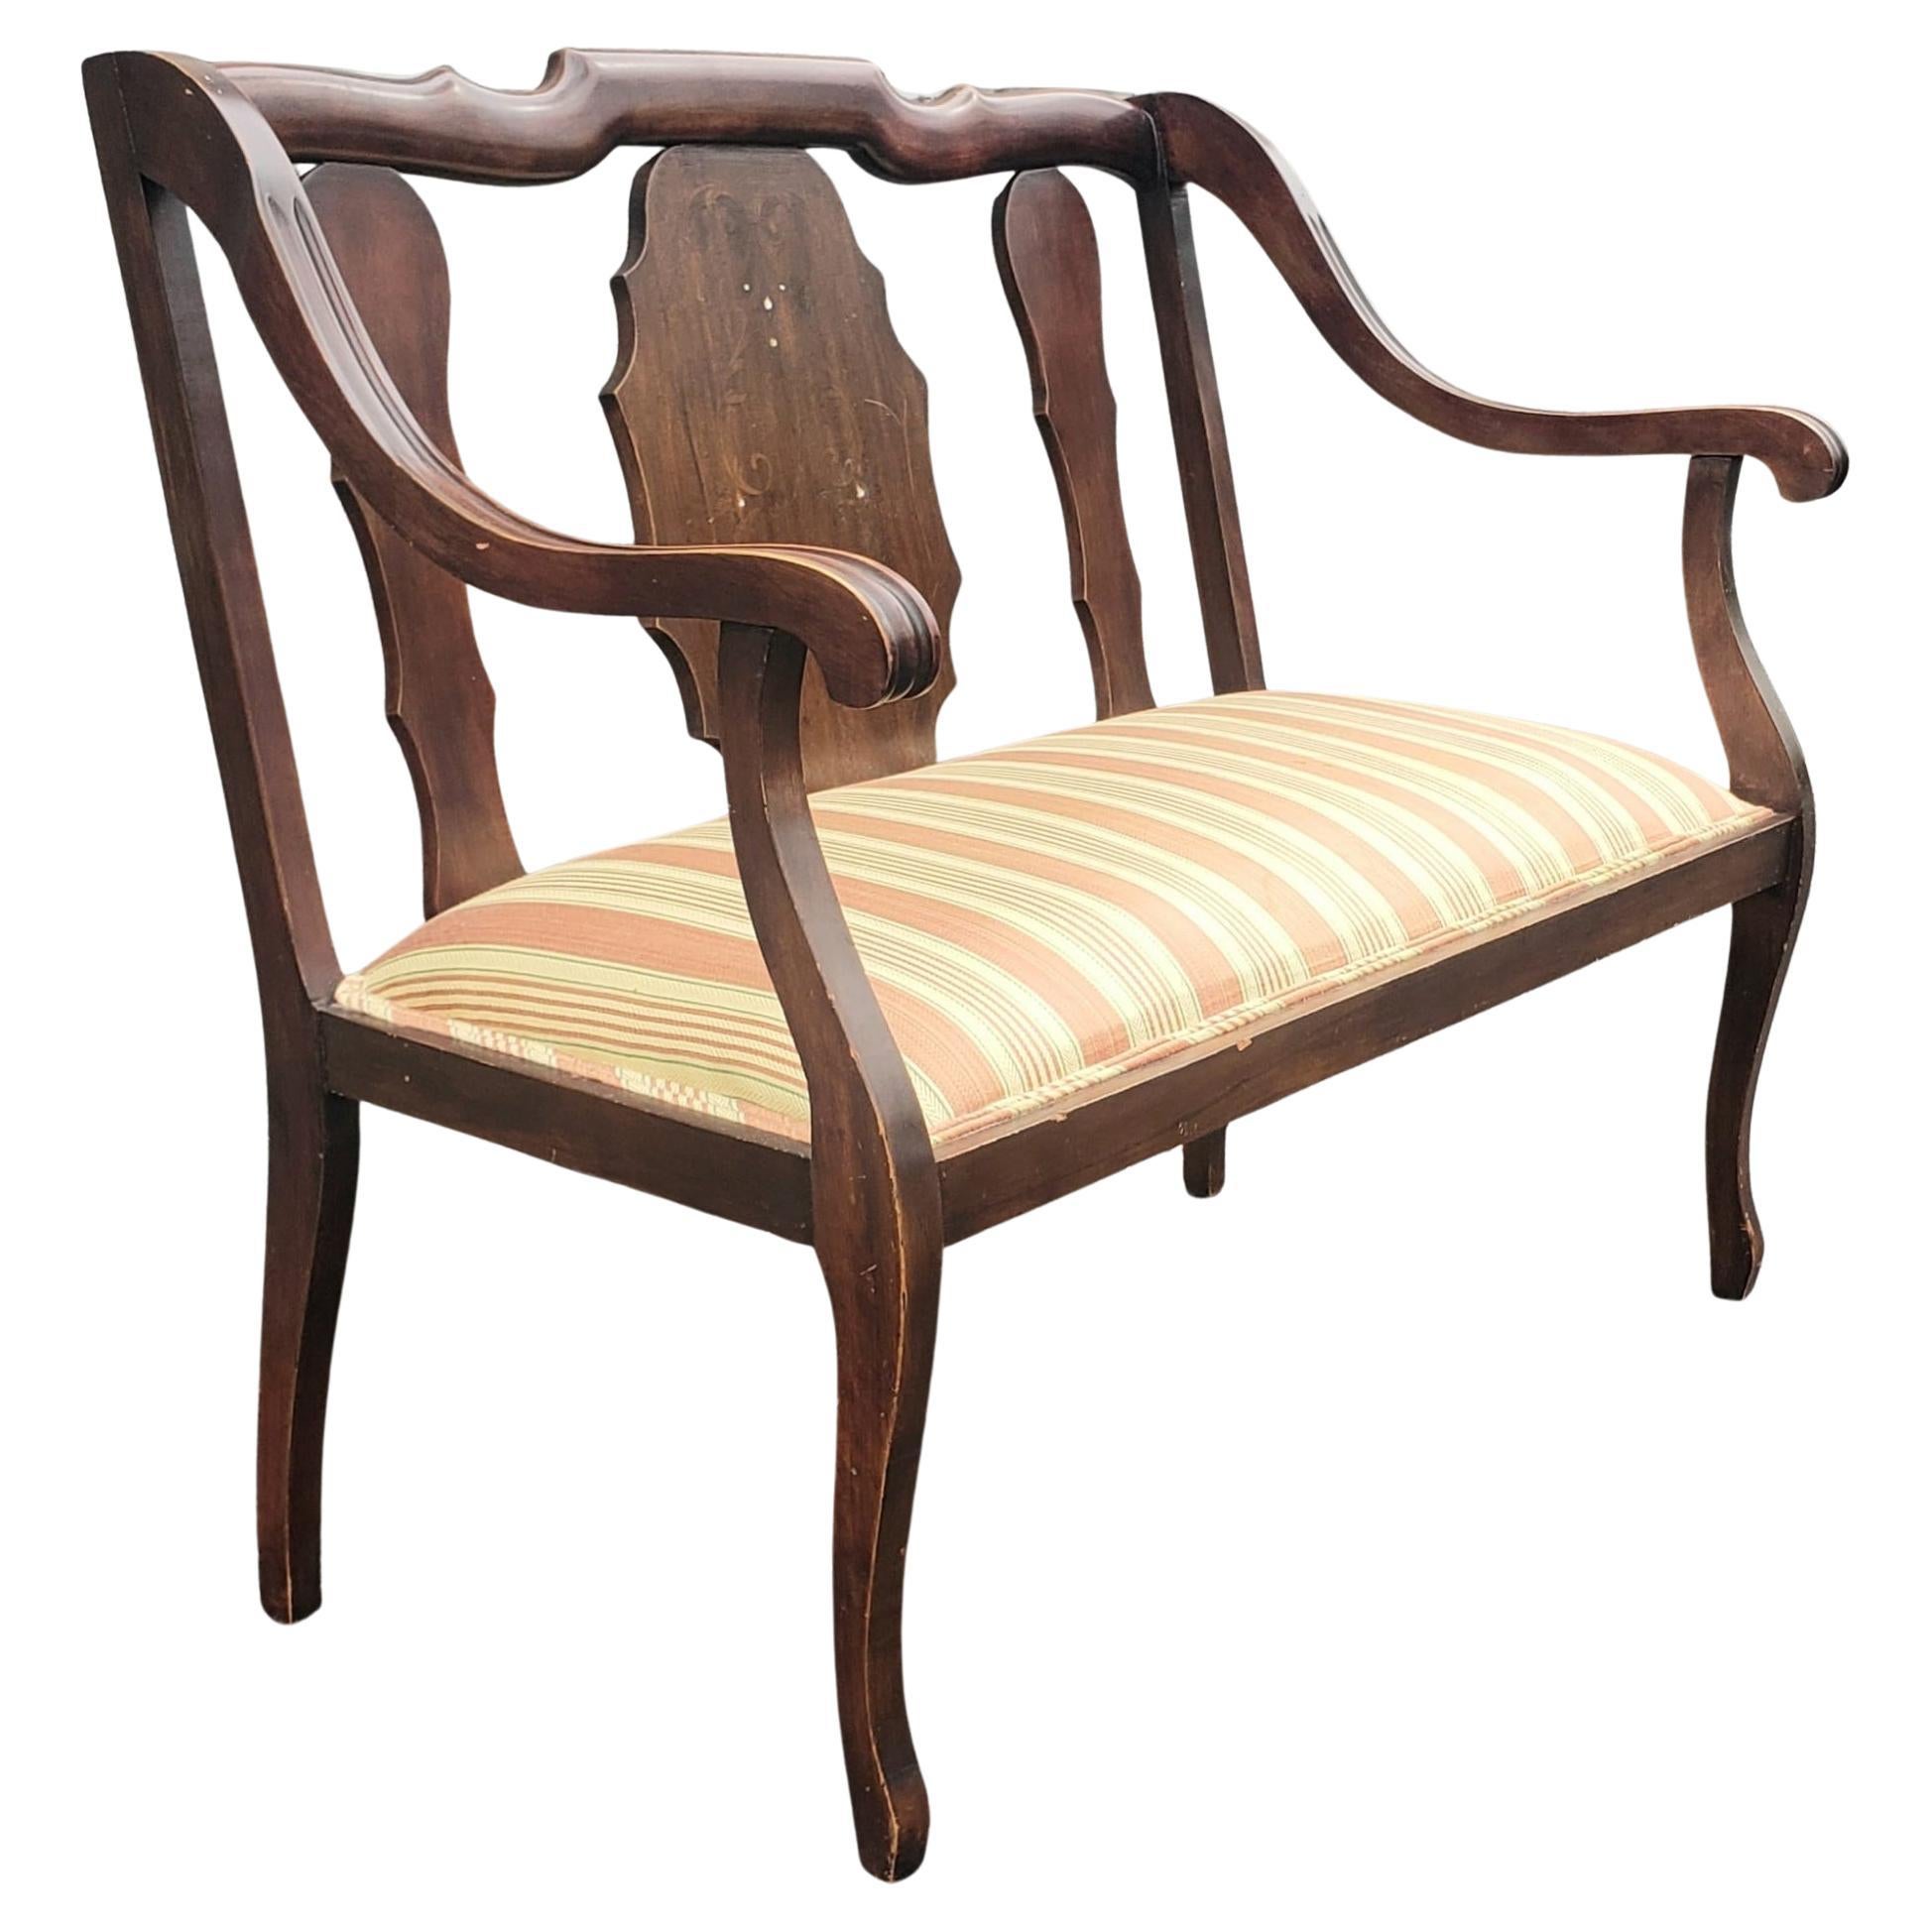 20th Century George III Style Walnut with Inlay and Upholstered Seat Settee In Good Condition For Sale In Germantown, MD